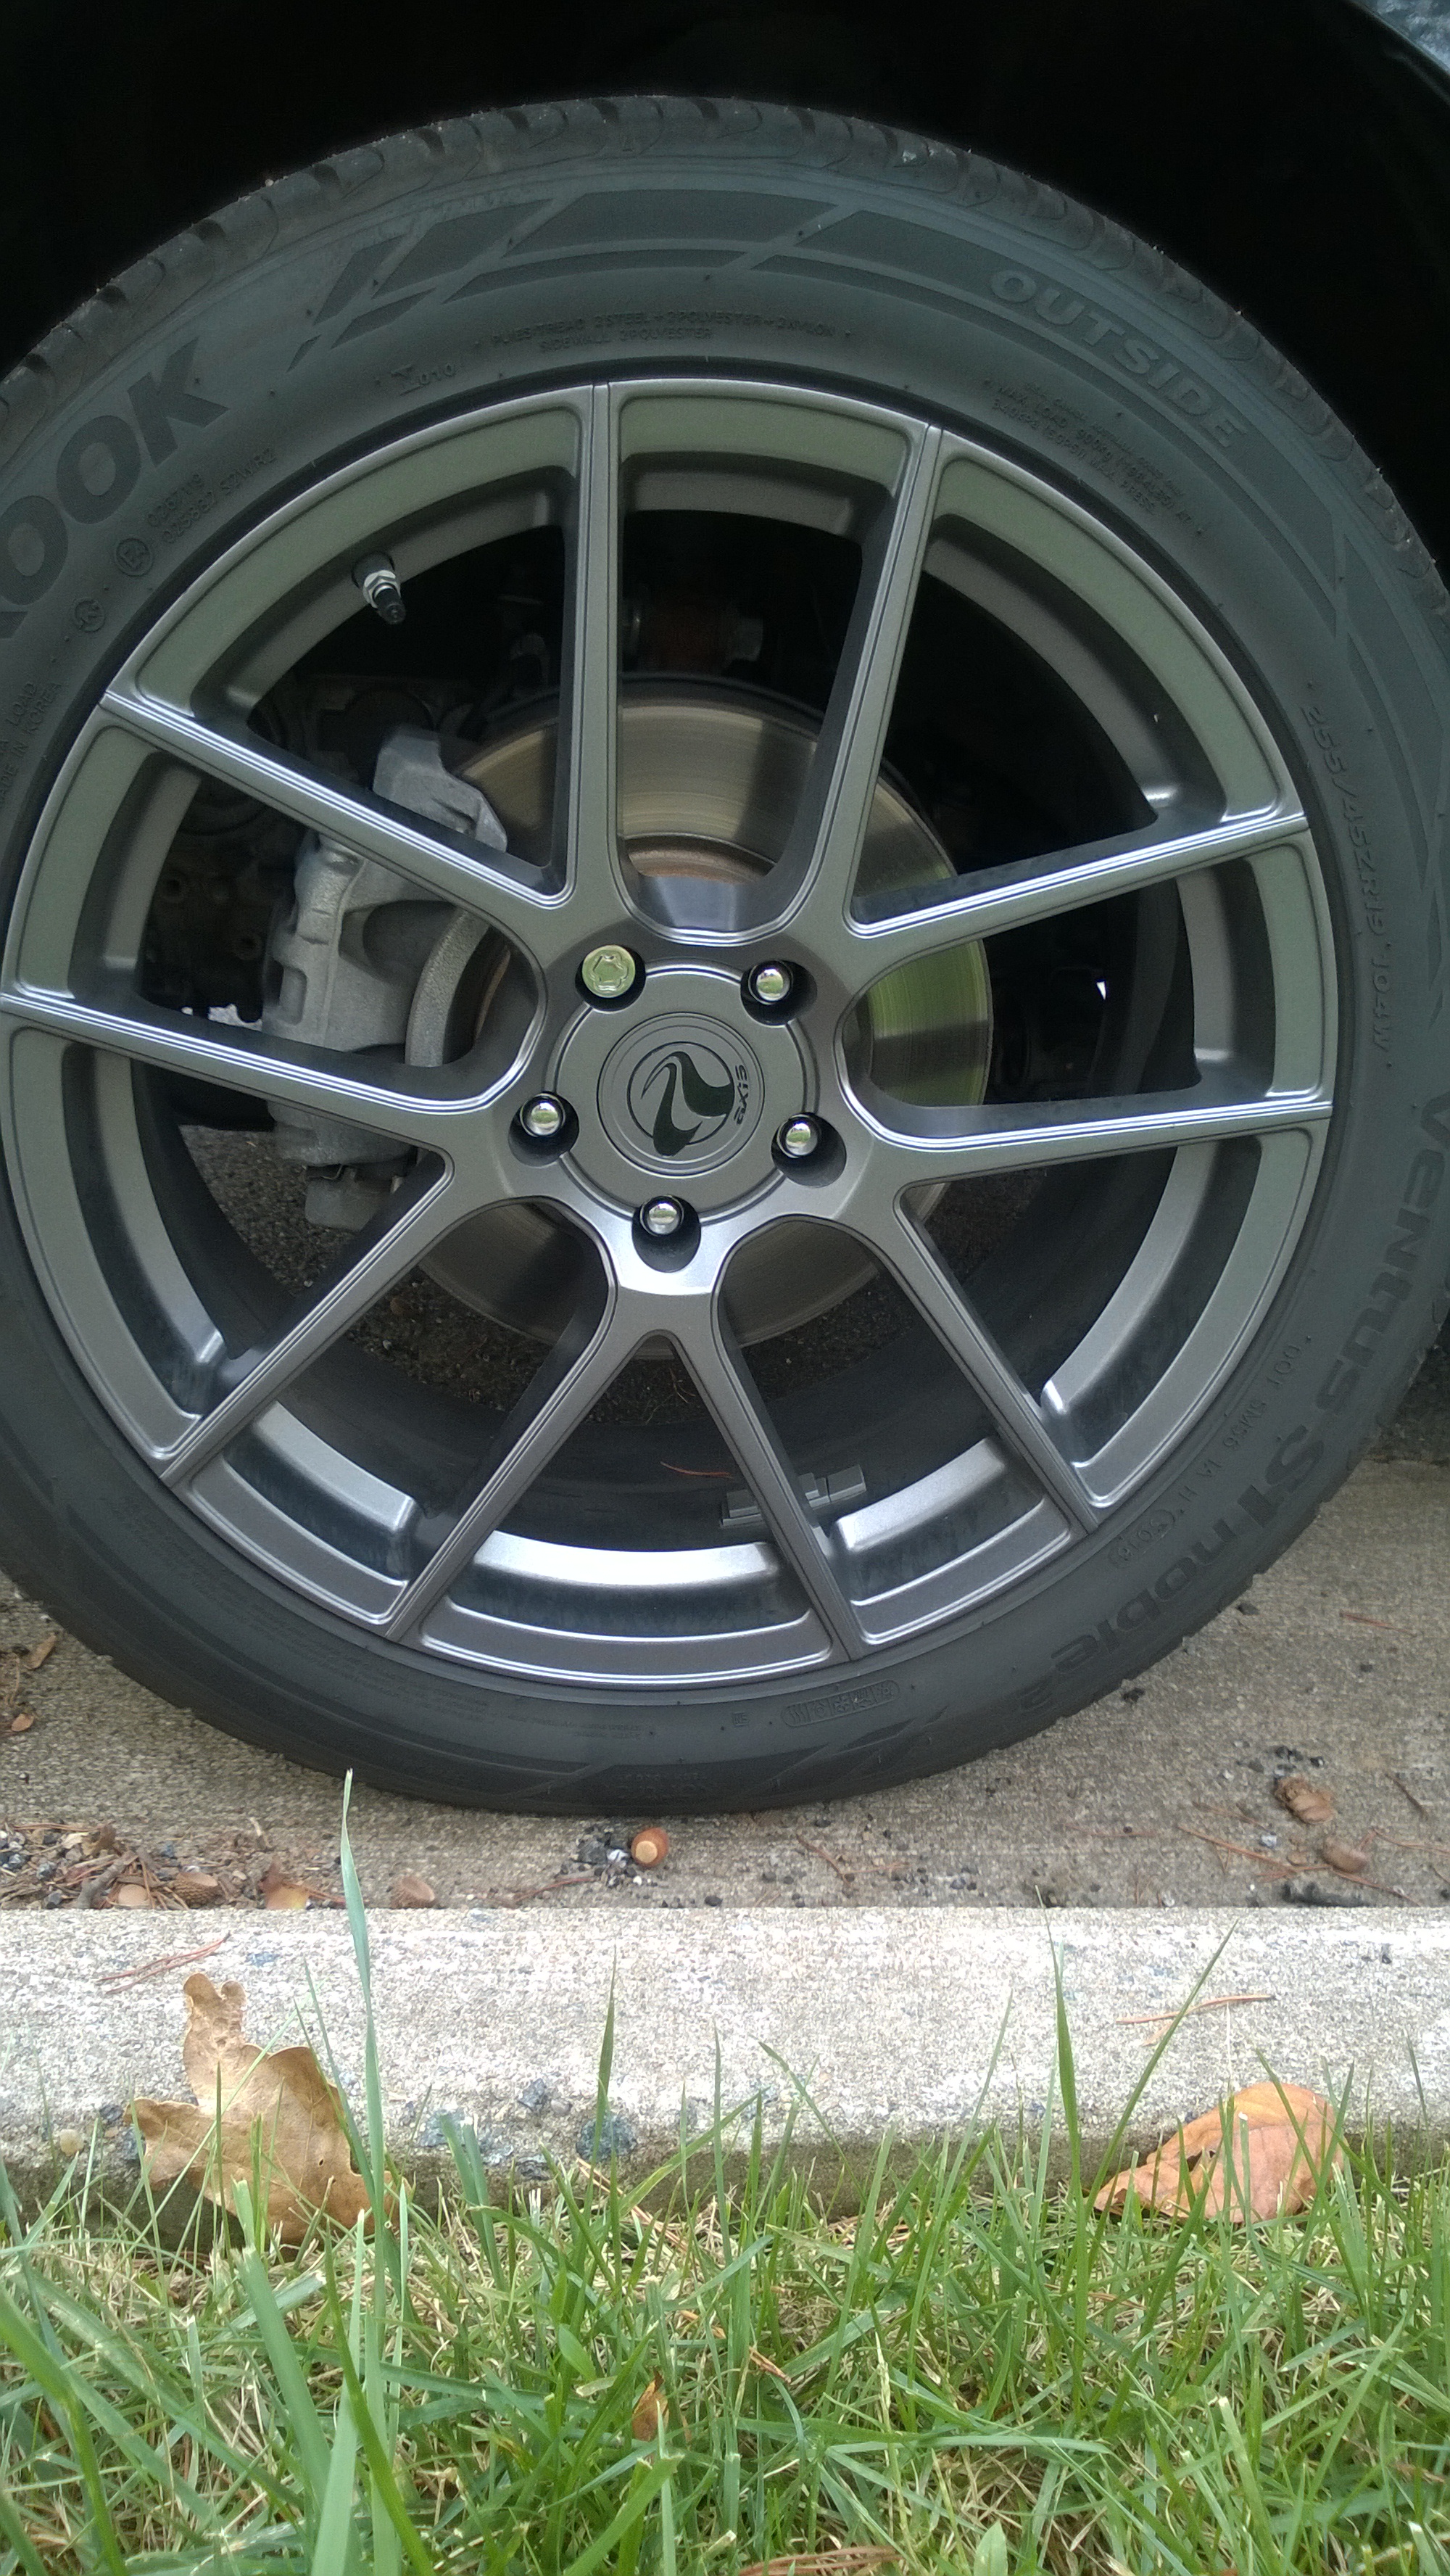 For Sale 19 x 8.5" Axis Model 5 Wheels Local Pickup in Balt/DC Area